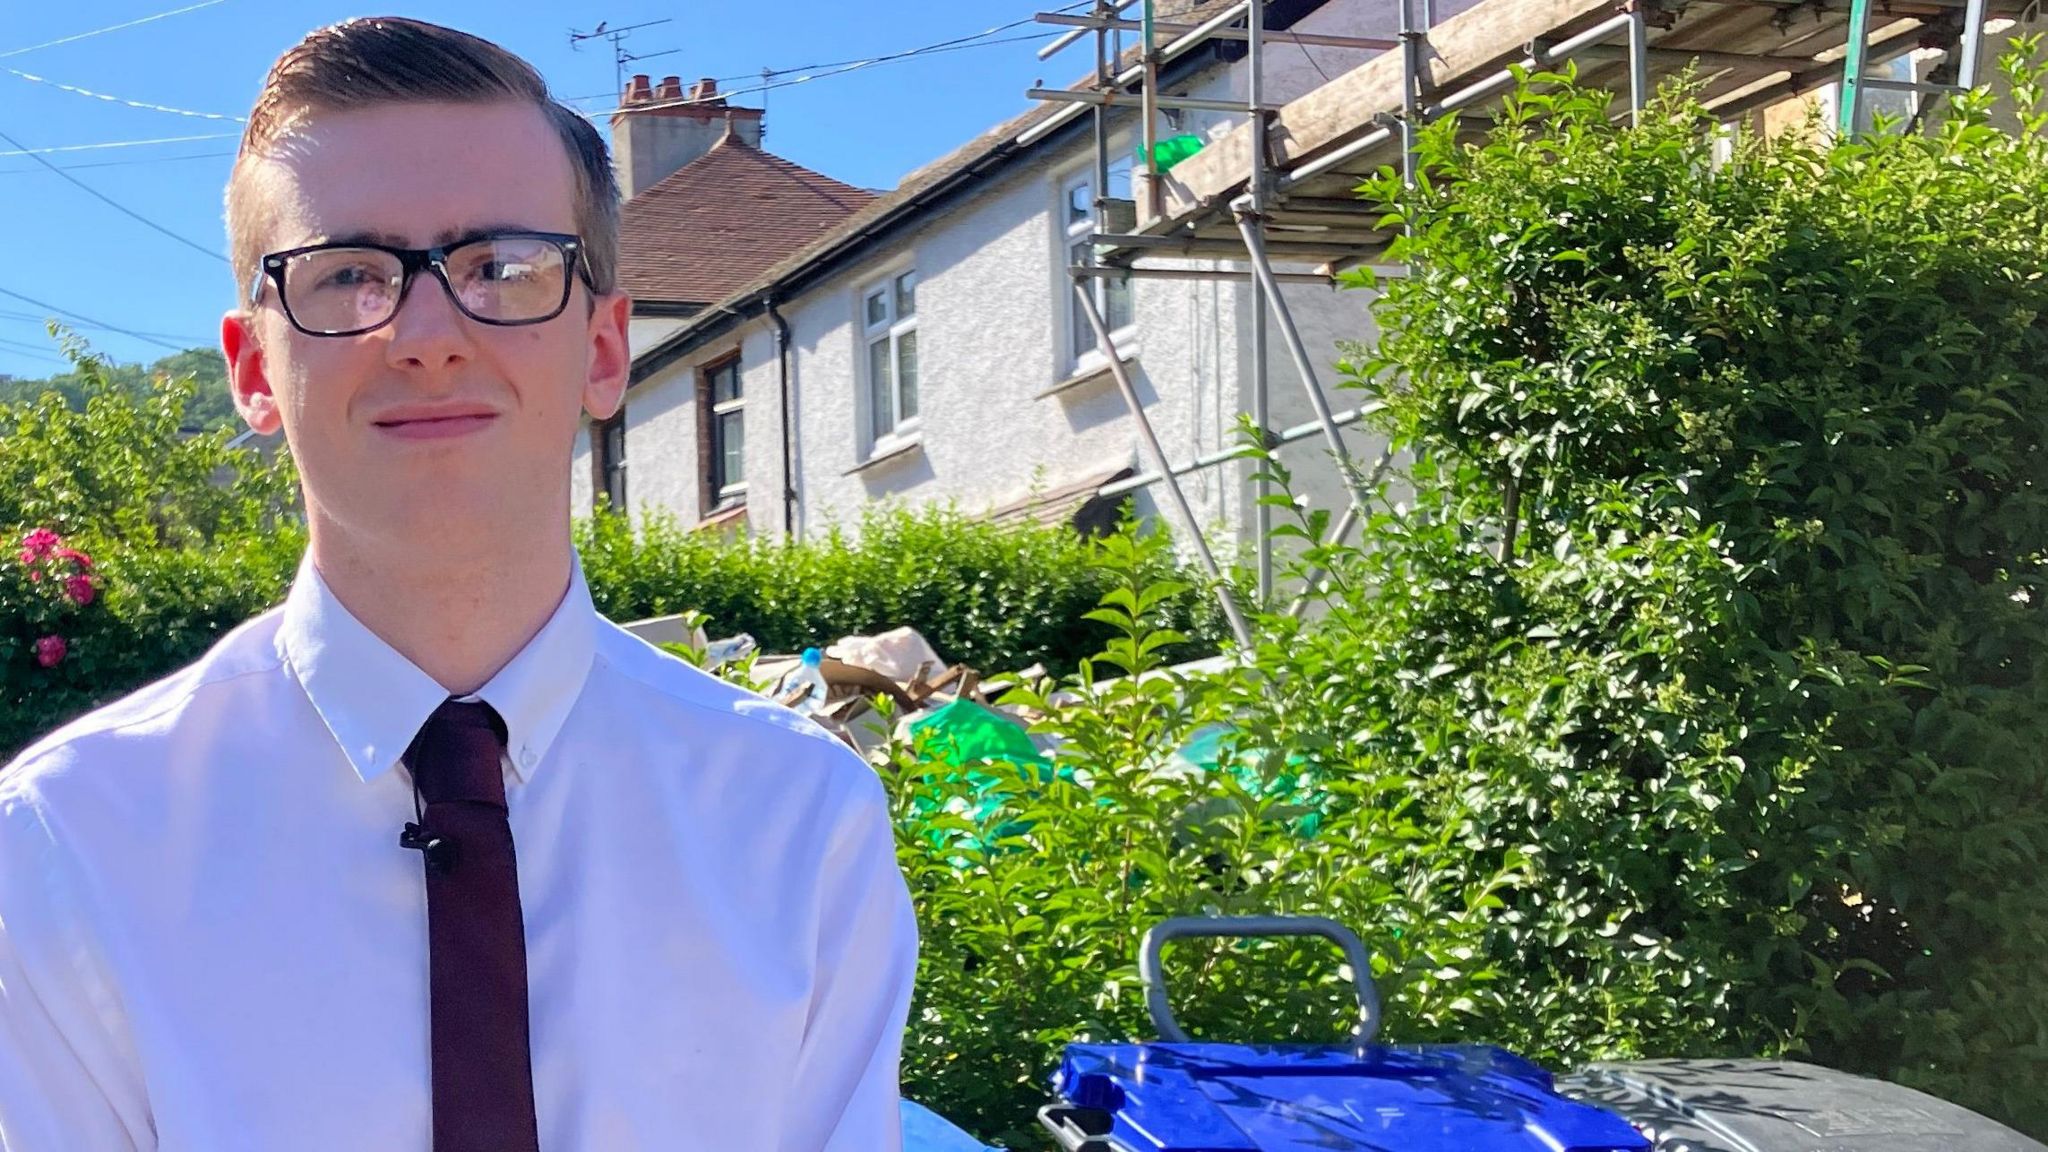 Jacob Riddle, who has started a petition on the bins problem, standing outside homes